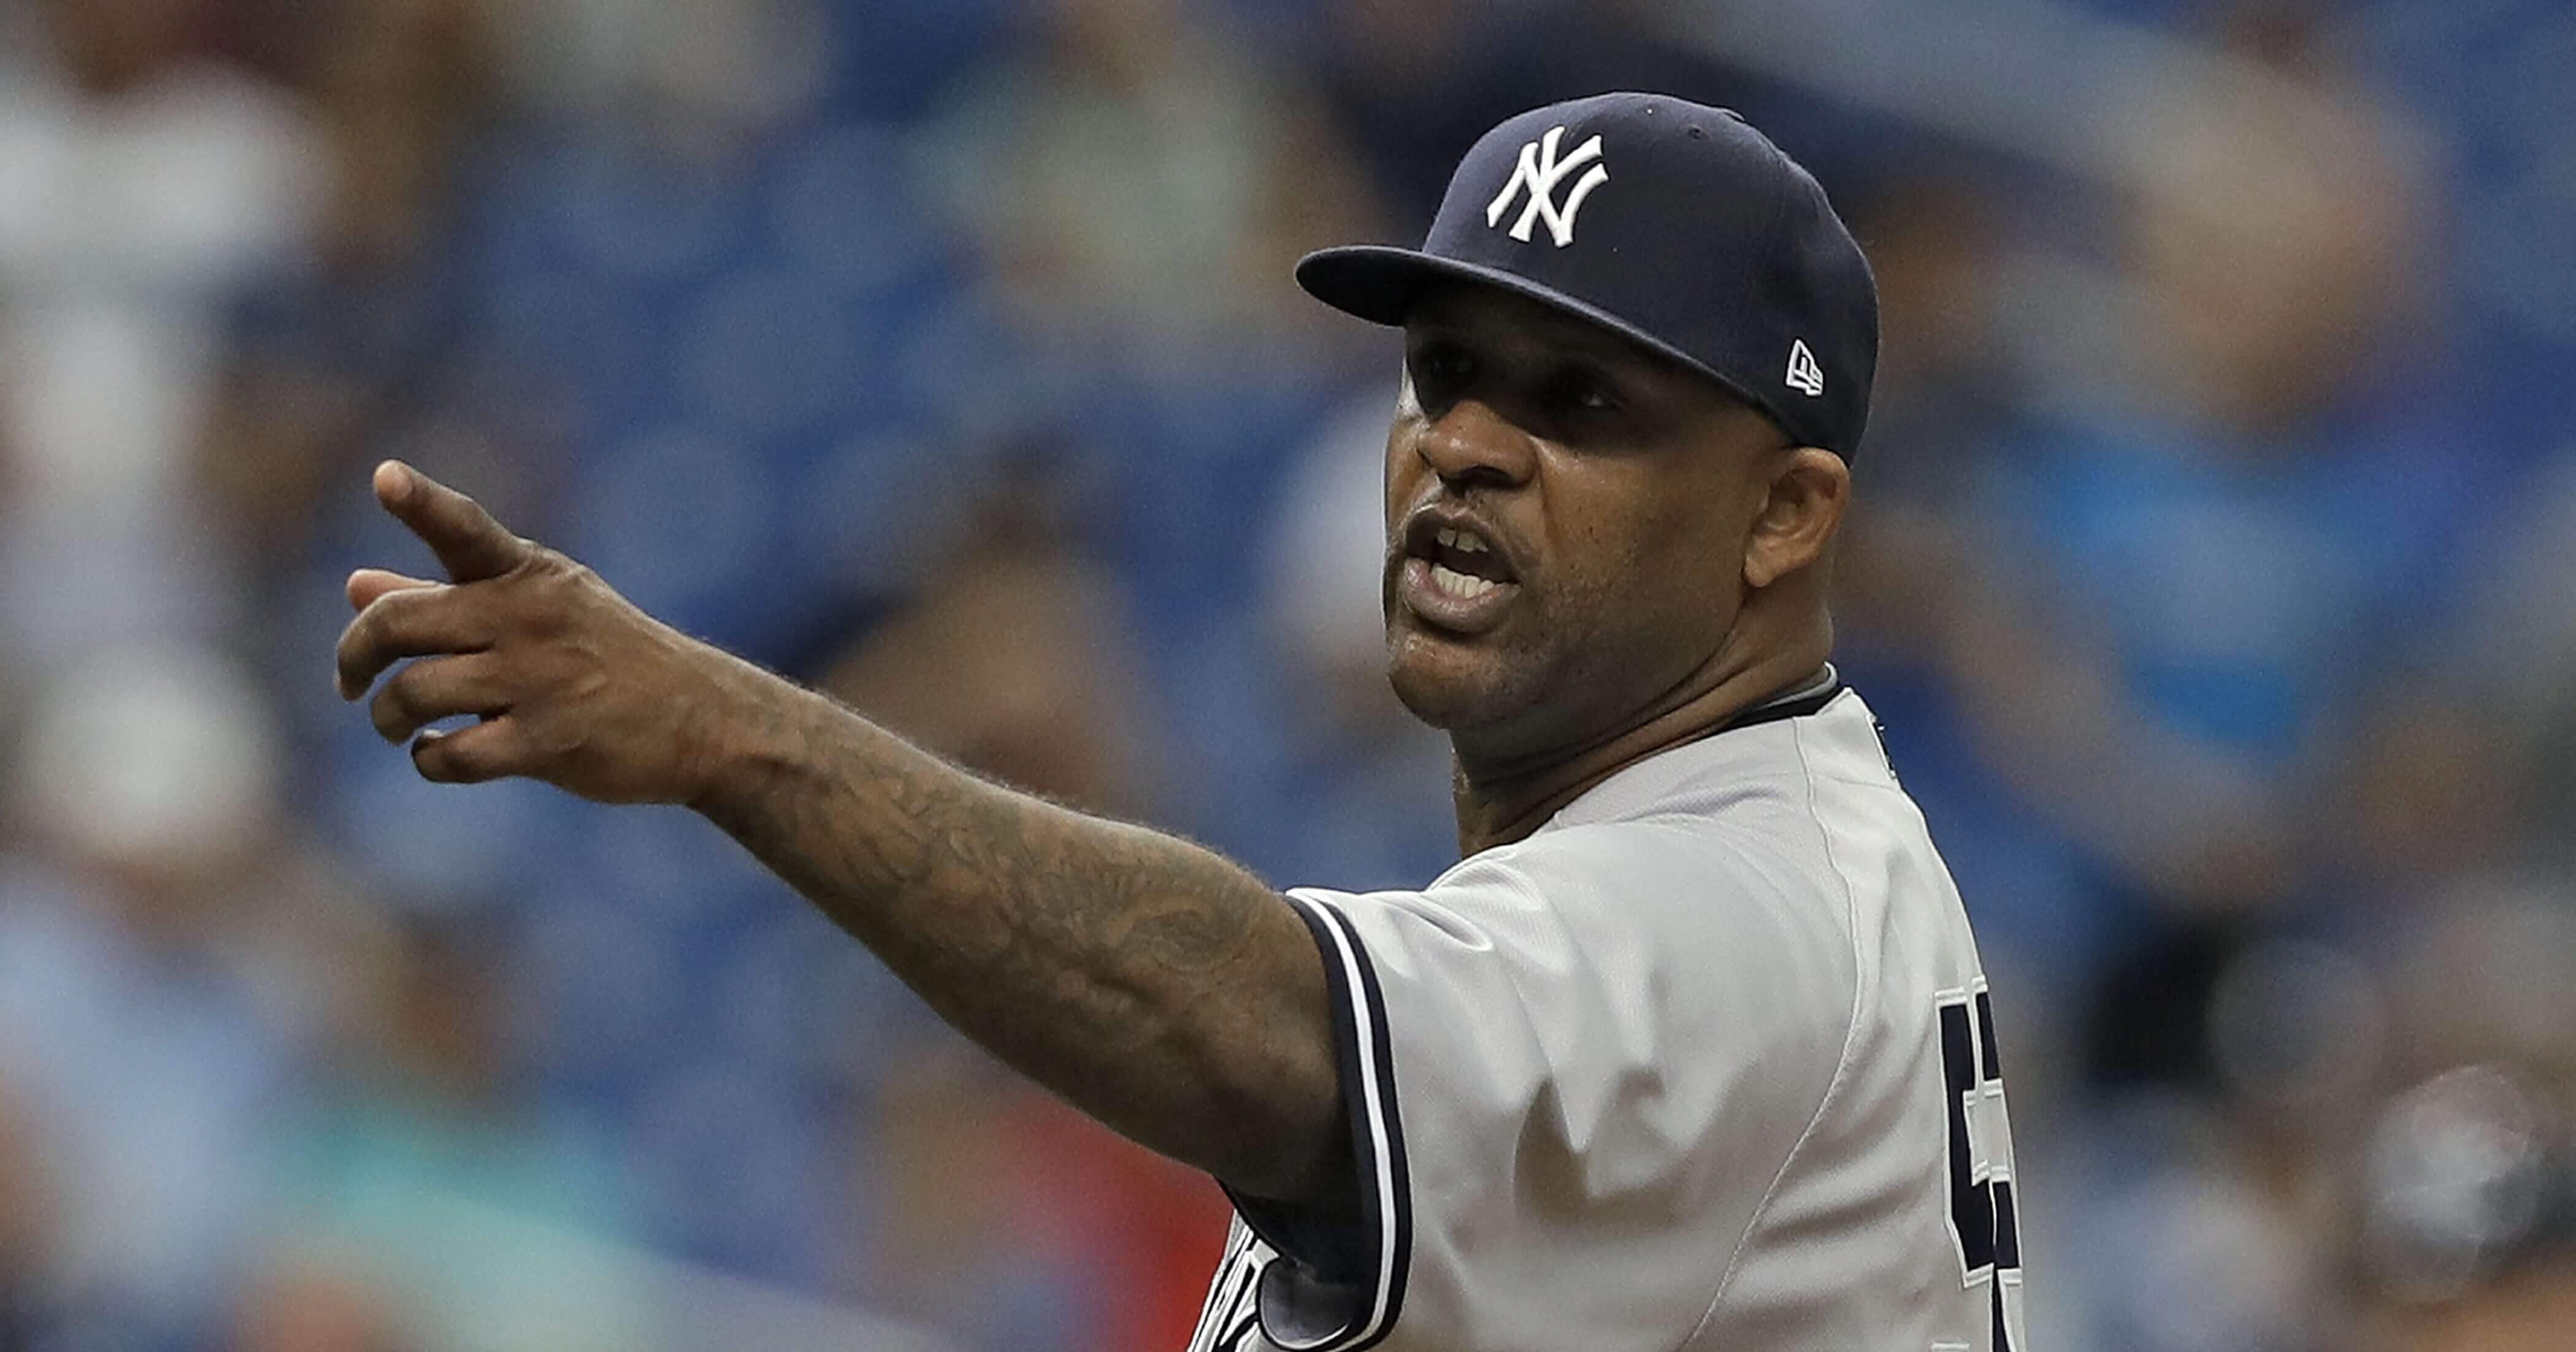 New York Yankees pitcher C.C. Sabathia points at the Tampa Bay dugout after he was ejected for hitting the Rays' Jesus Sucre with a pitch during the sixth inning of a Sept. 27 game in St. Petersburg.